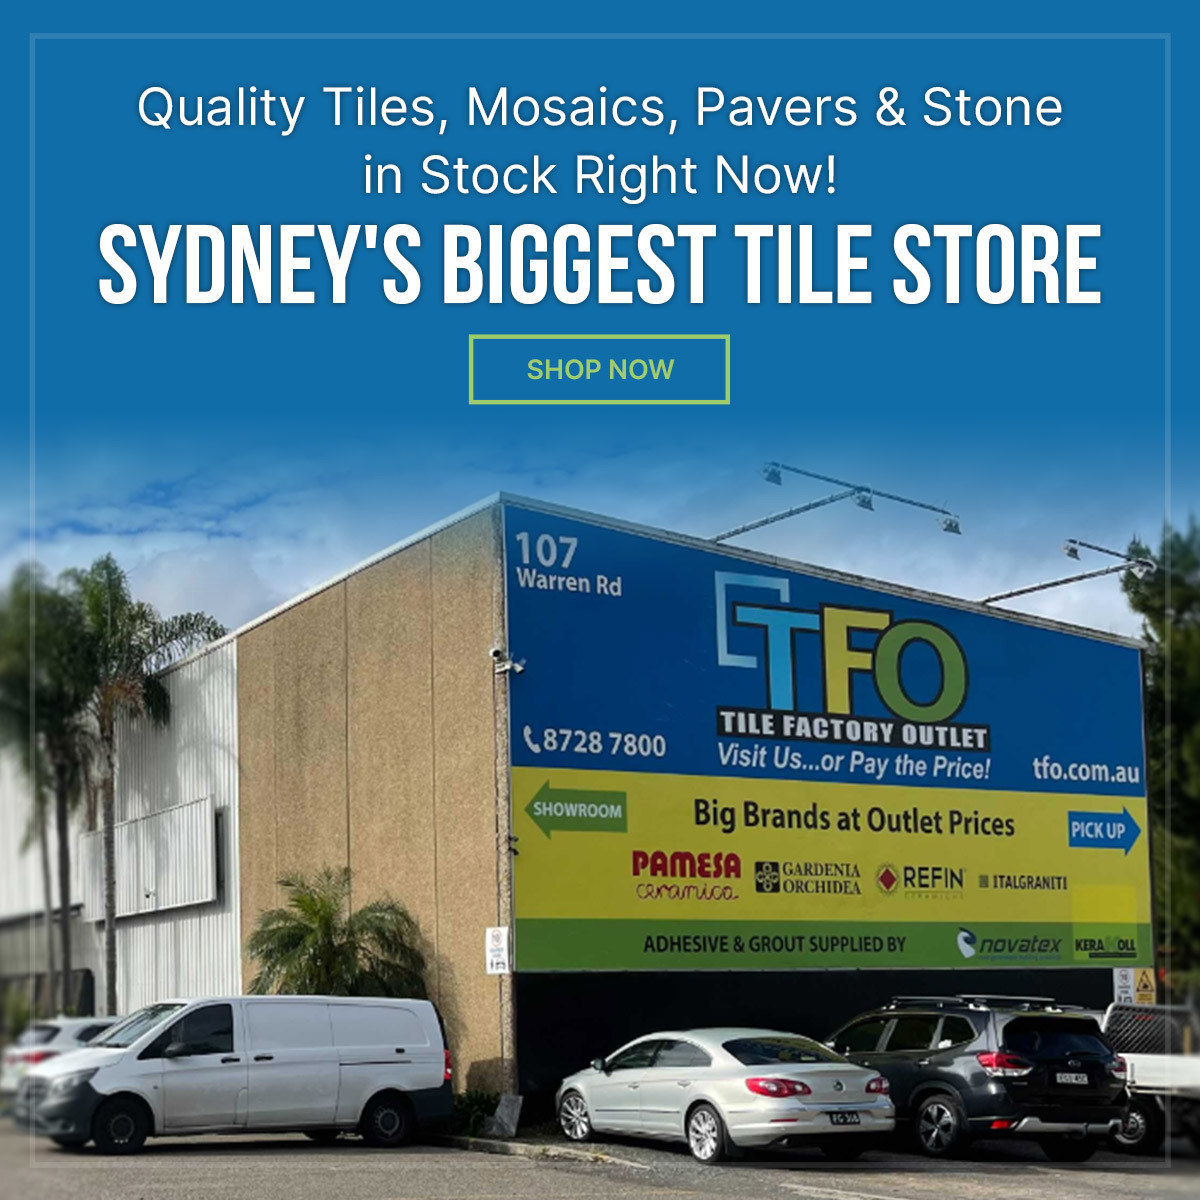 Bathroom Tiles Sydney – Luxurious Floor And Wall Bathroom Tiles At The Lowest Prices In Sydney